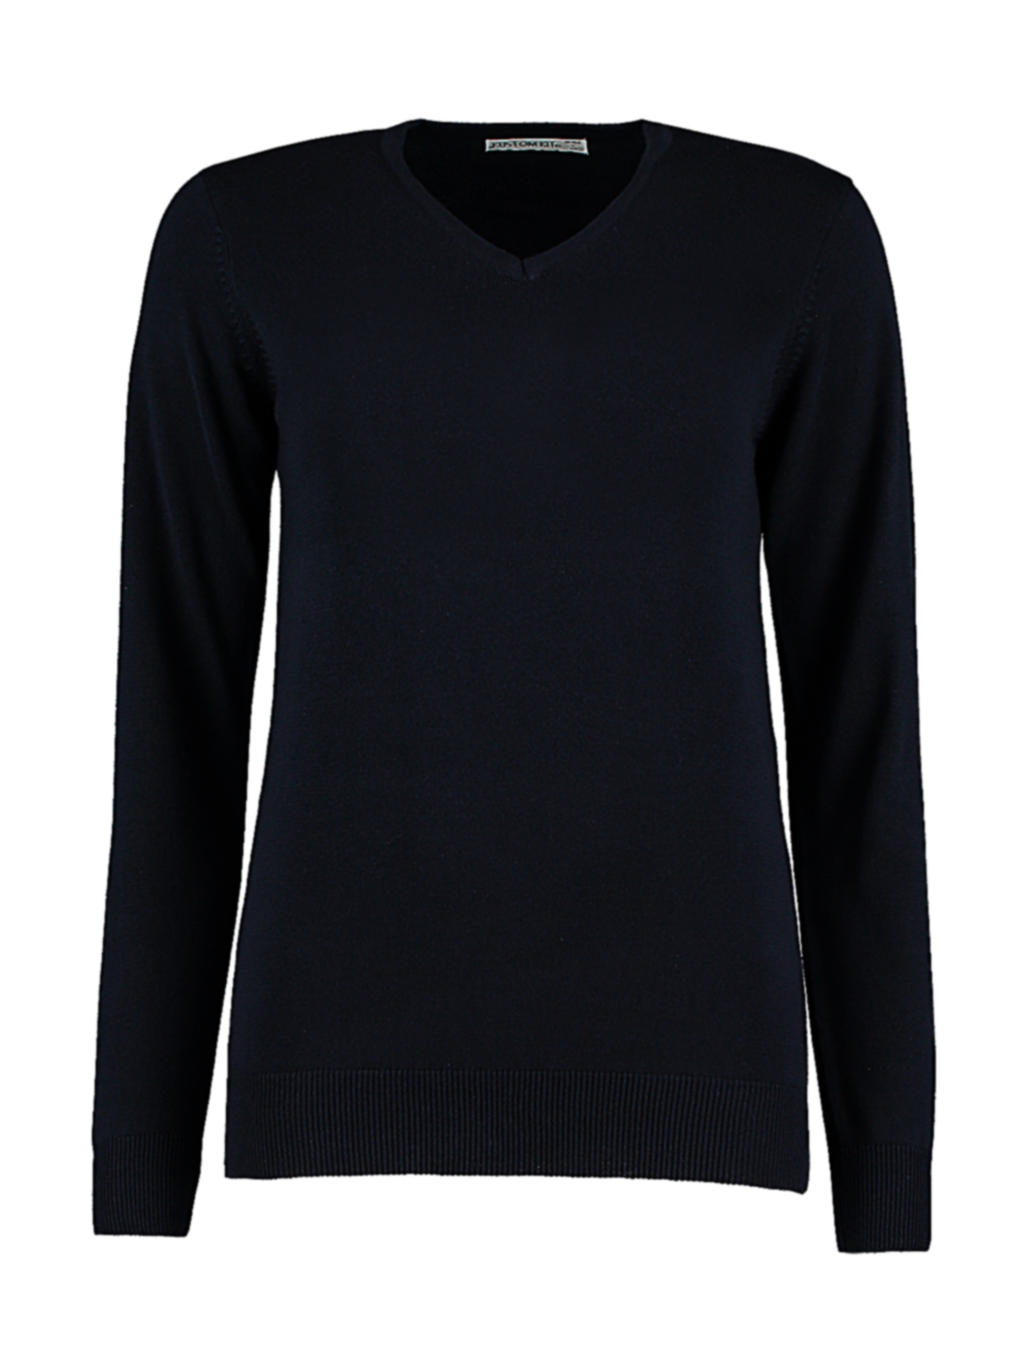  Womens Classic Fit Arundel Sweater in Farbe Navy